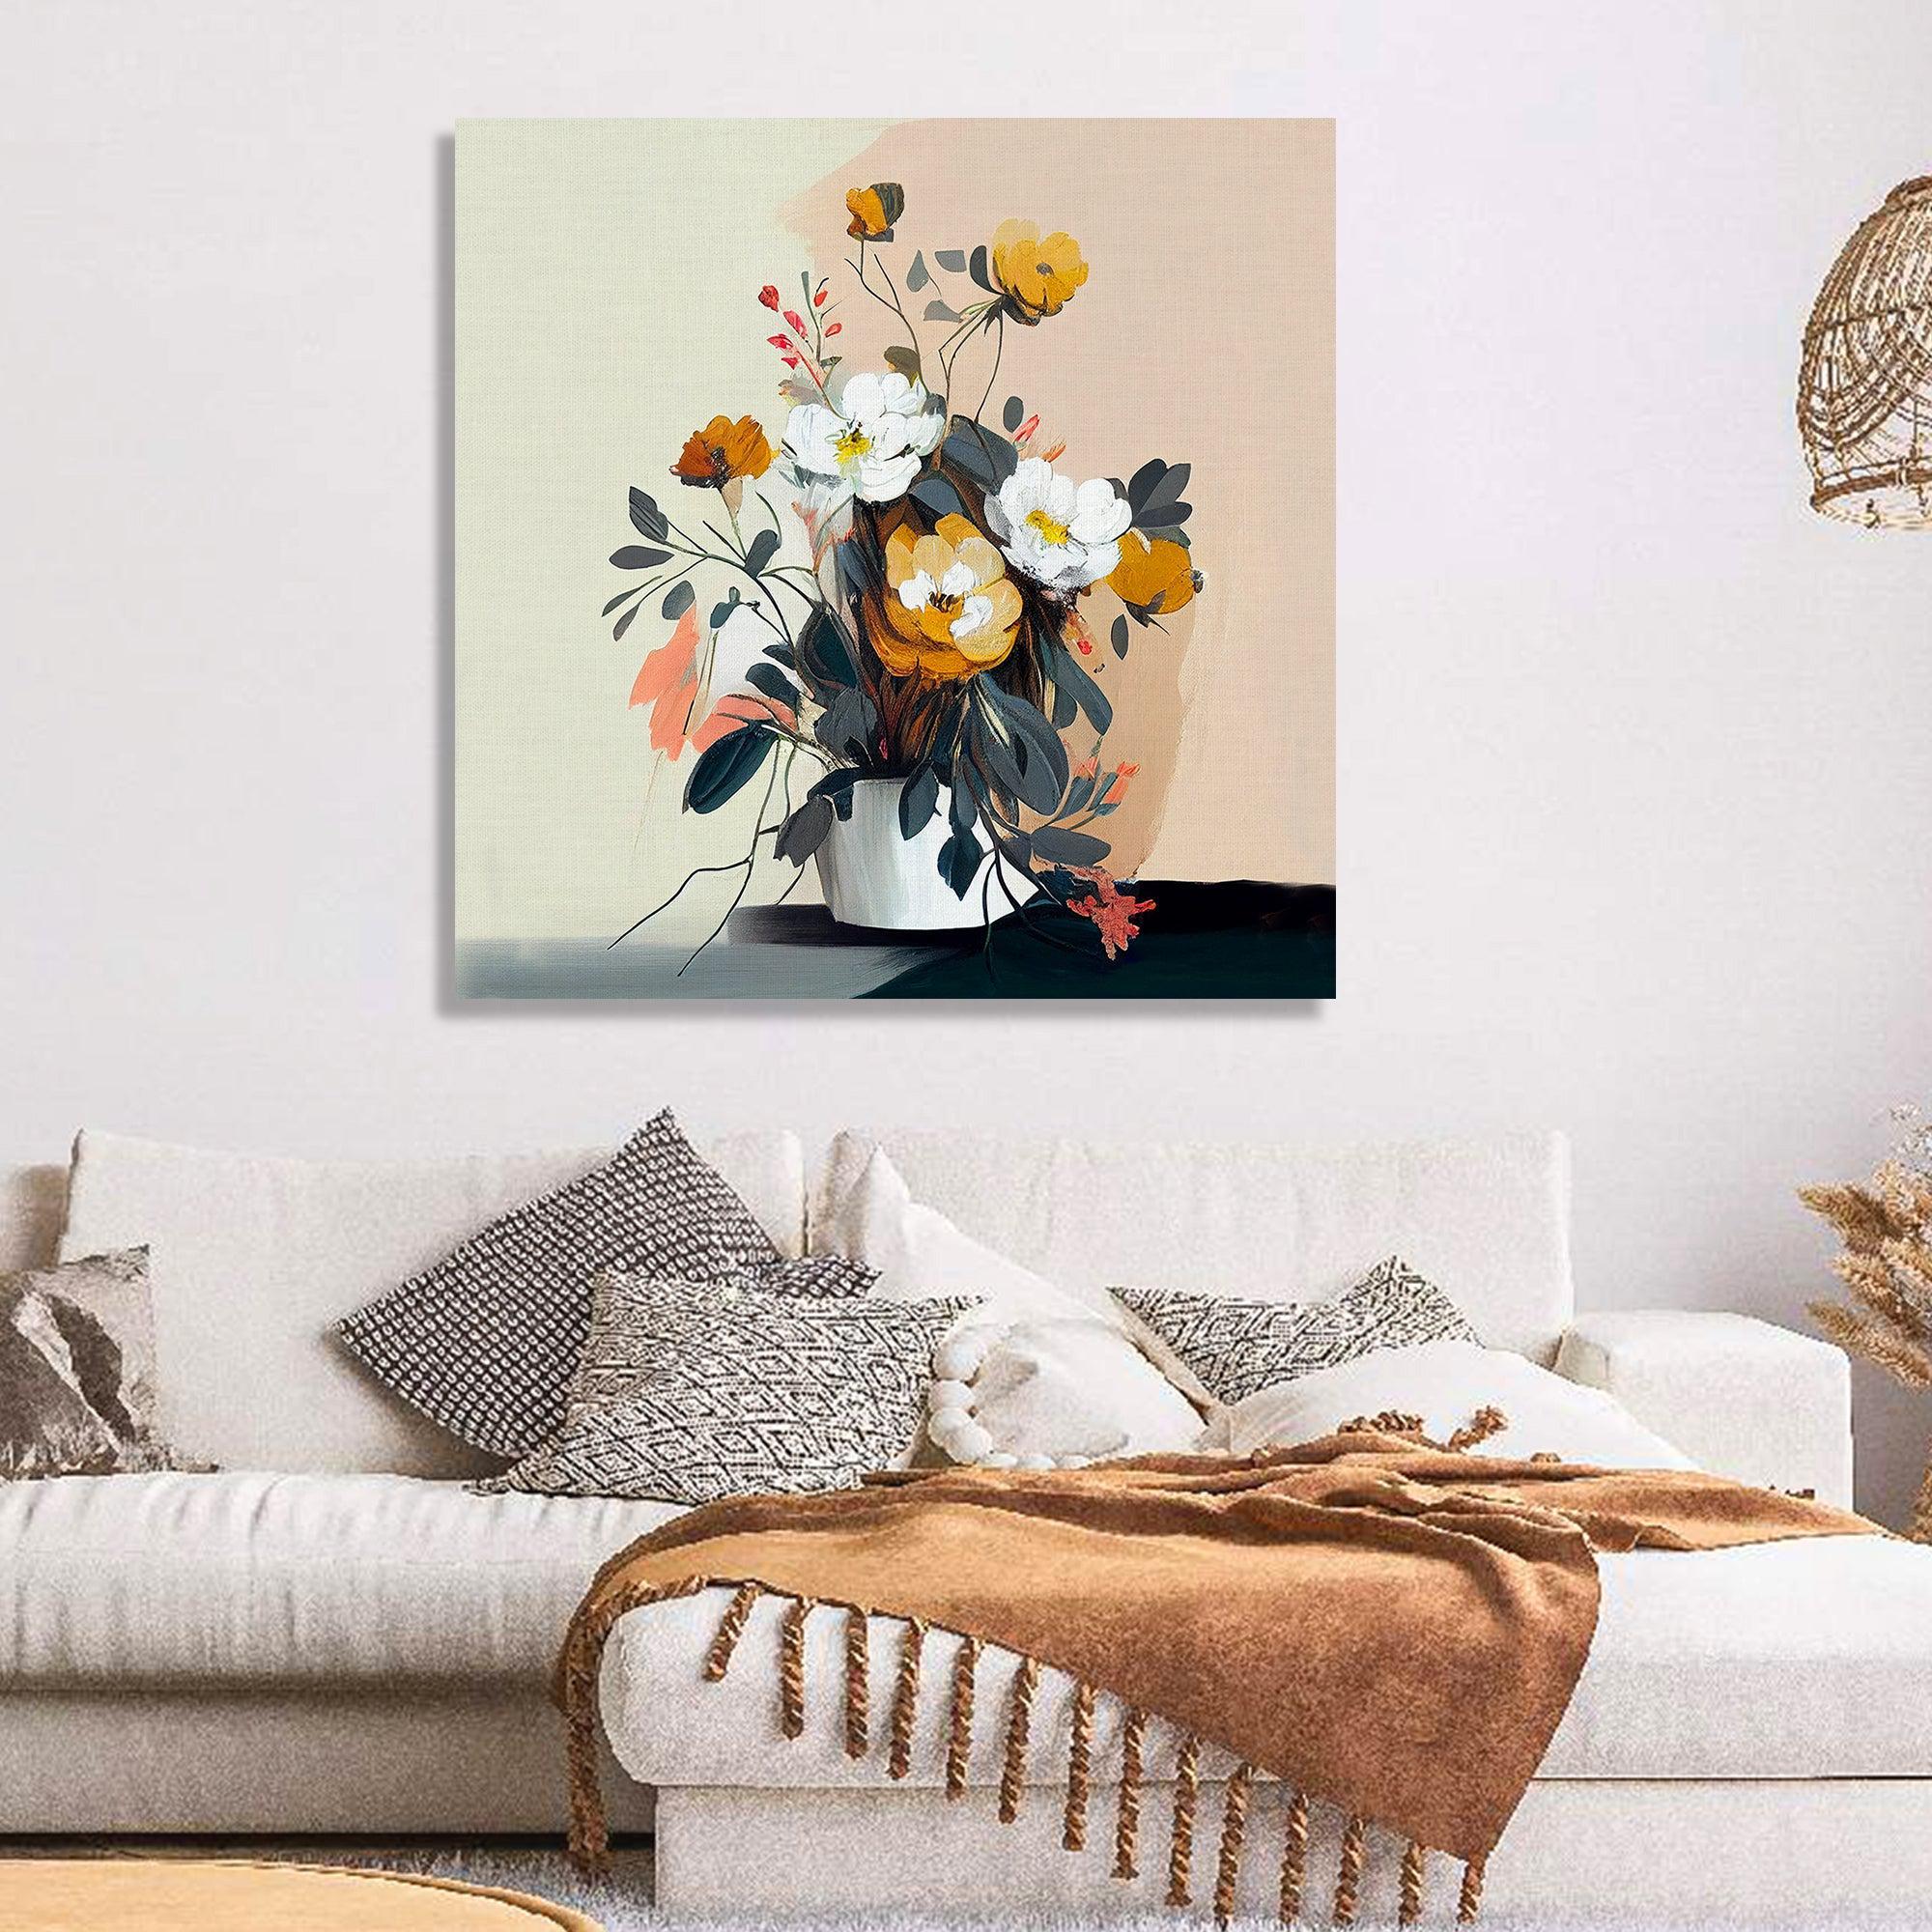 Chinese Mural Modern Living Room Decor Sofa Flower Painting Large Canvas  Wall Art Pictures For Home Decor Artwork 60x140cm/24x55in With-Black-Frame